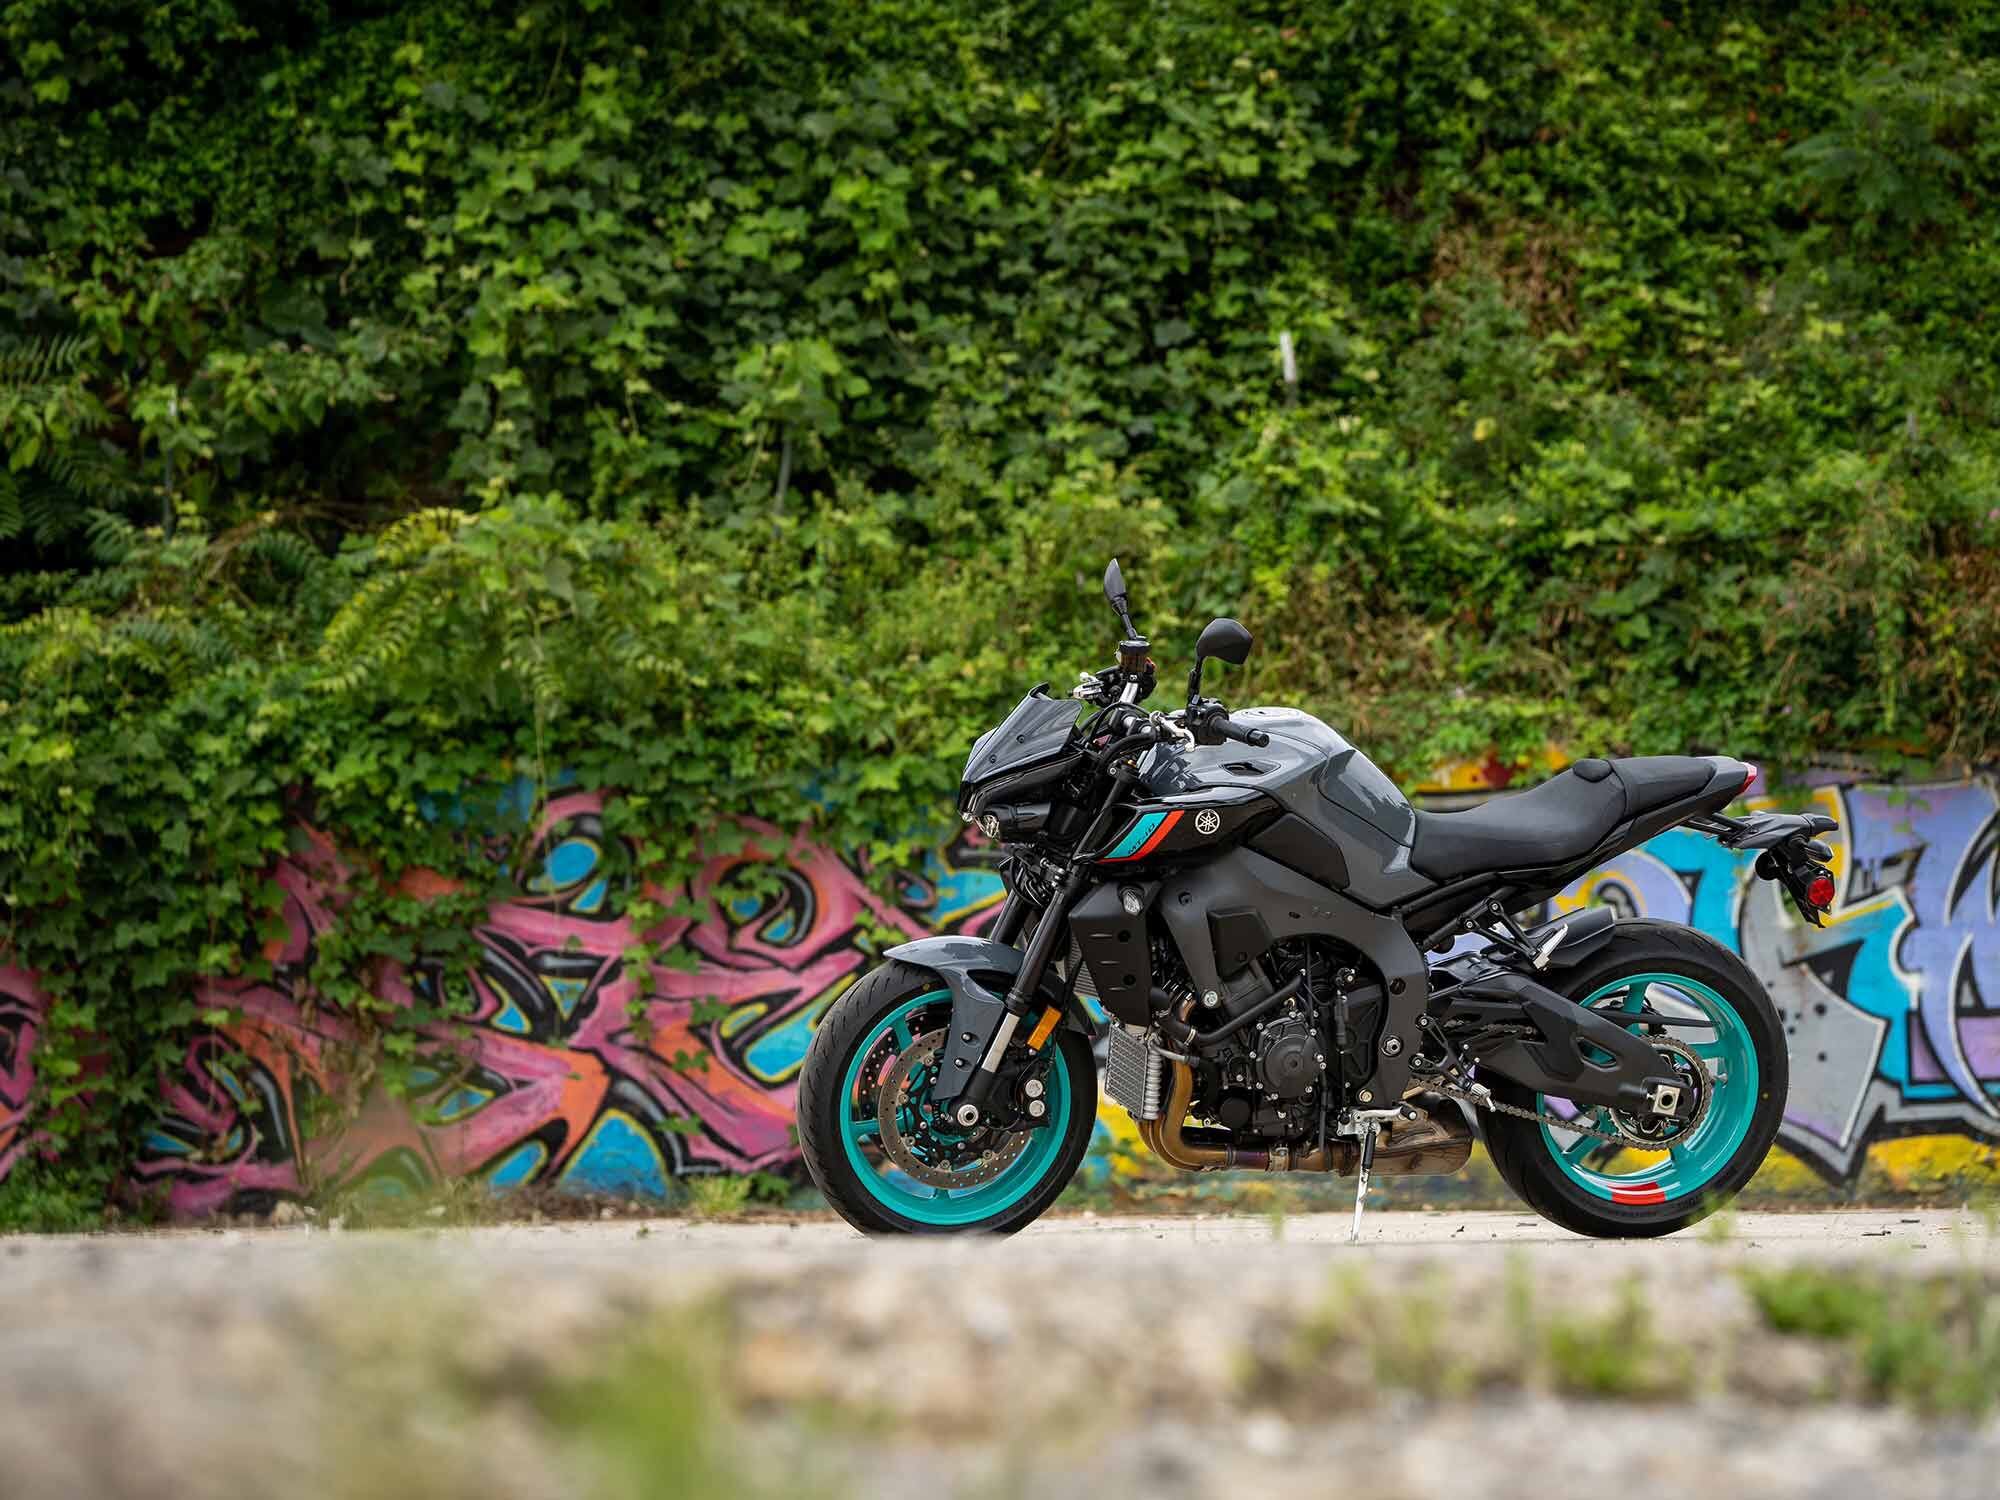 Styling-wise the Yamaha MT-10 appears much cleaner and lust-worthy than the 2016-2021 model.